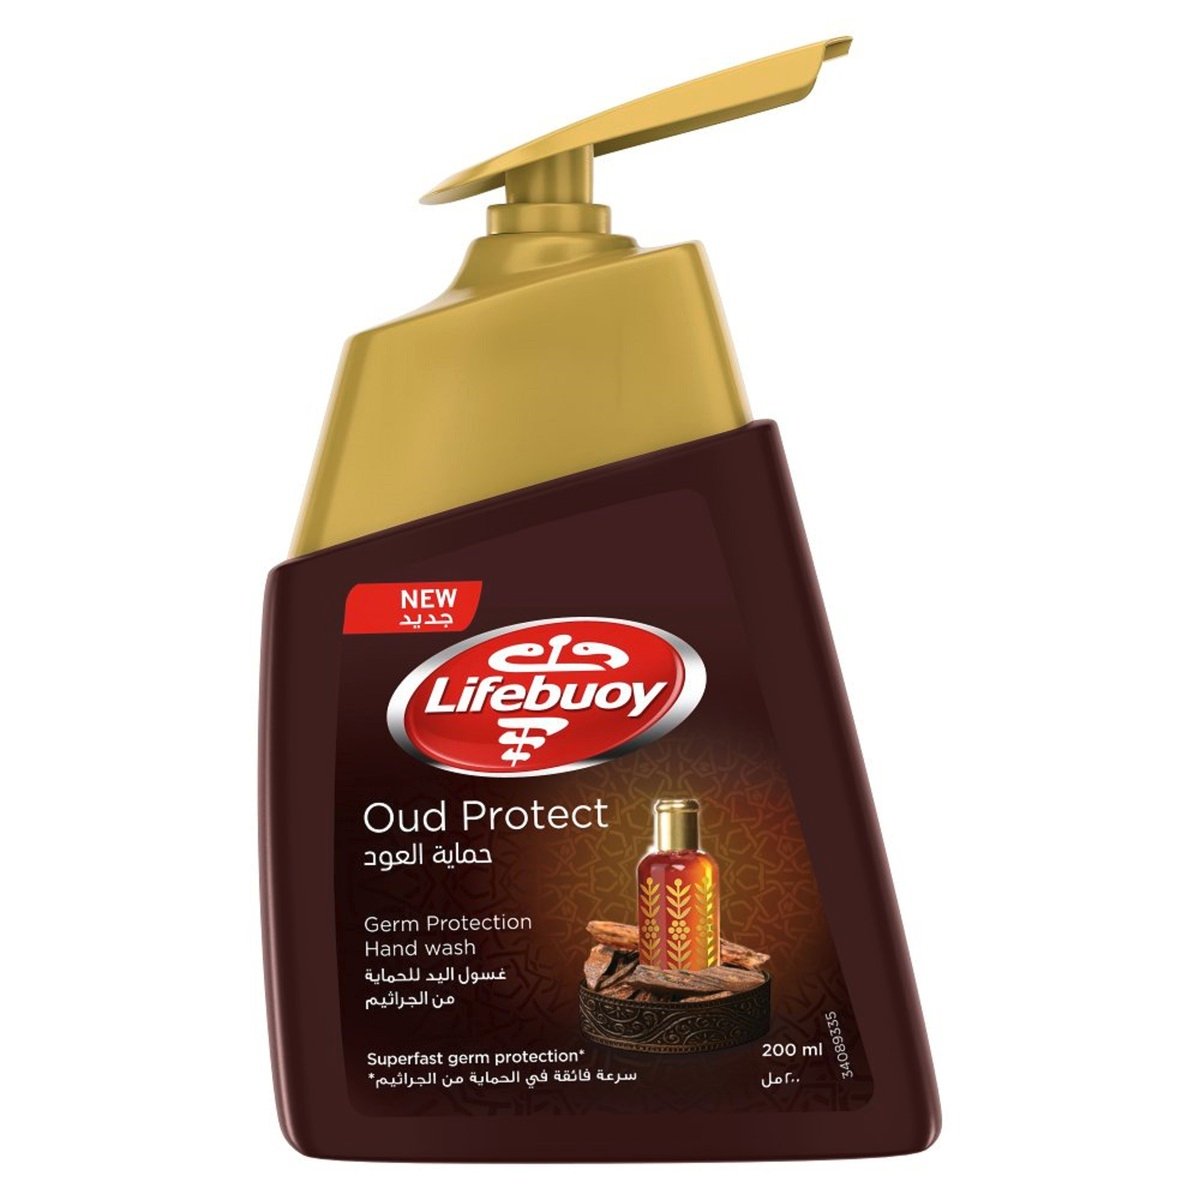 Lifebuoy Germ Protection Hand Wash Oud Protect 200 ml